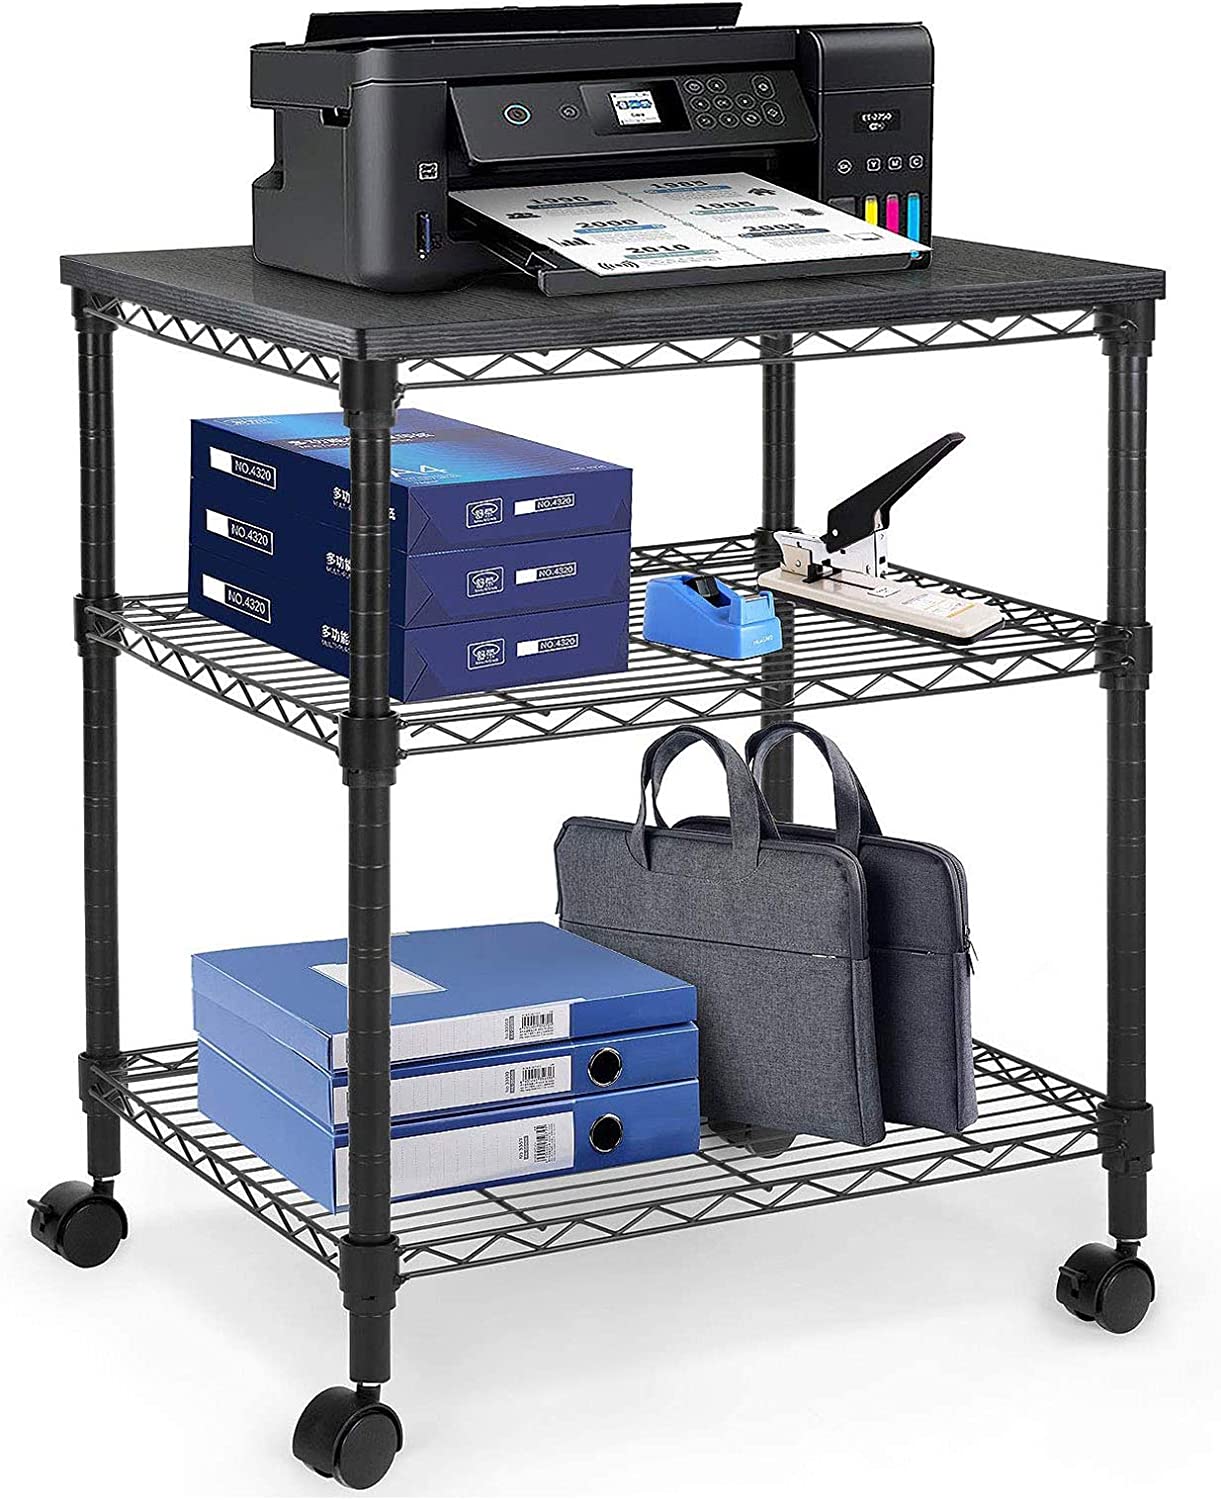 Printer Stand With 3-Tier Design